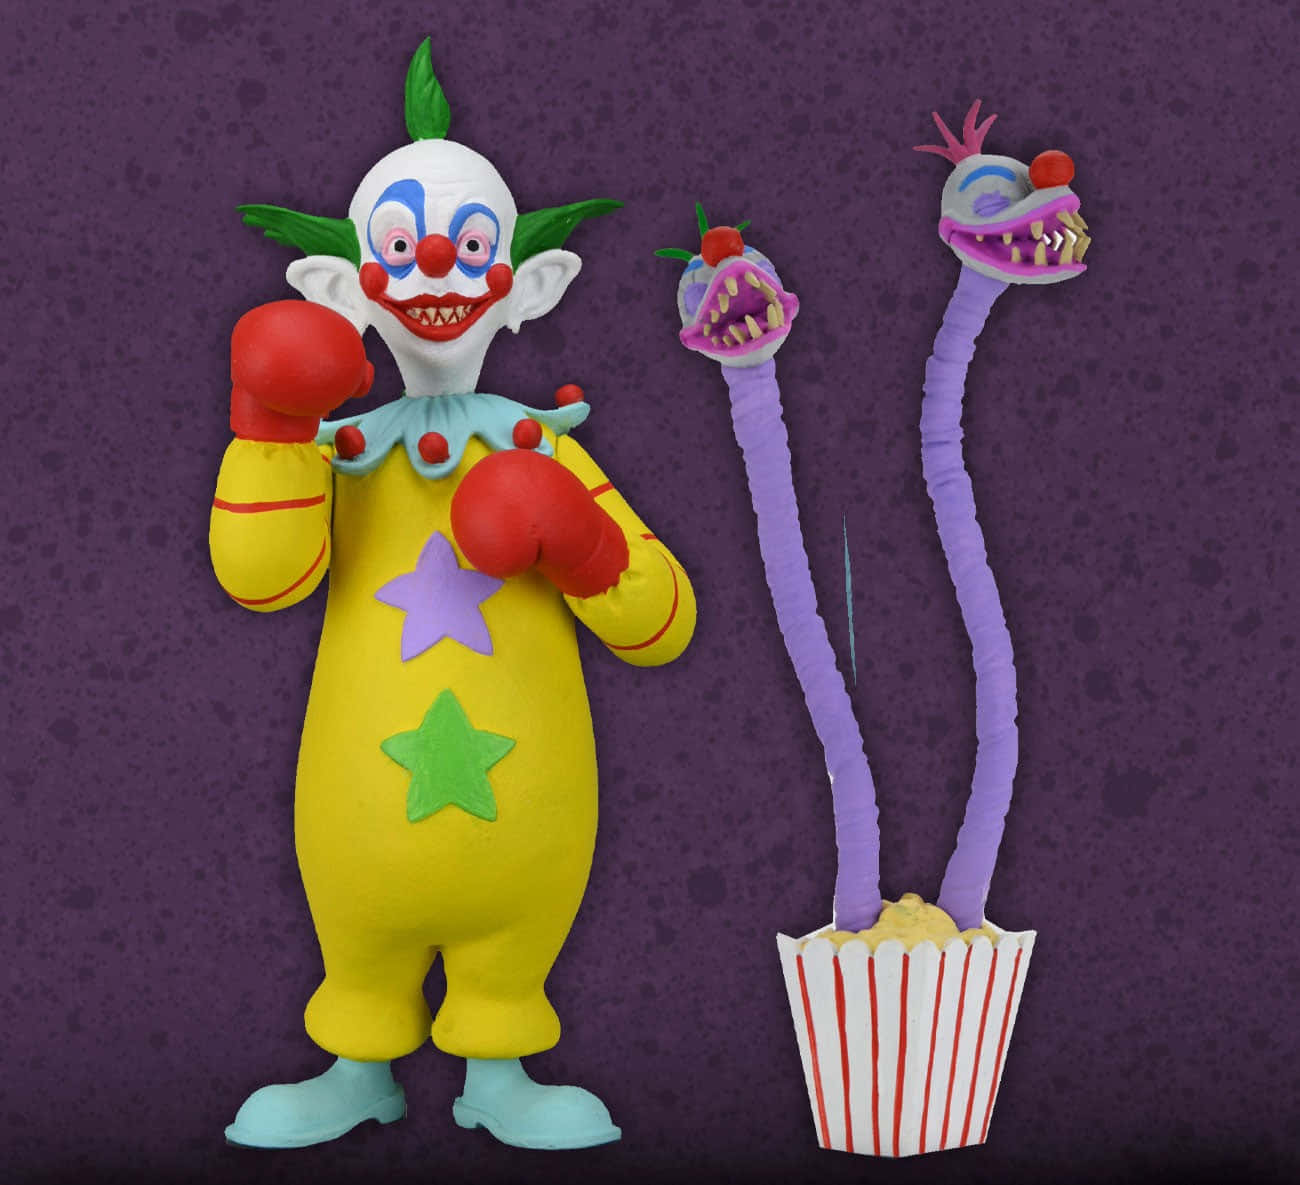 Killer Klowns From Outer Space With Snake Monsters Wallpaper